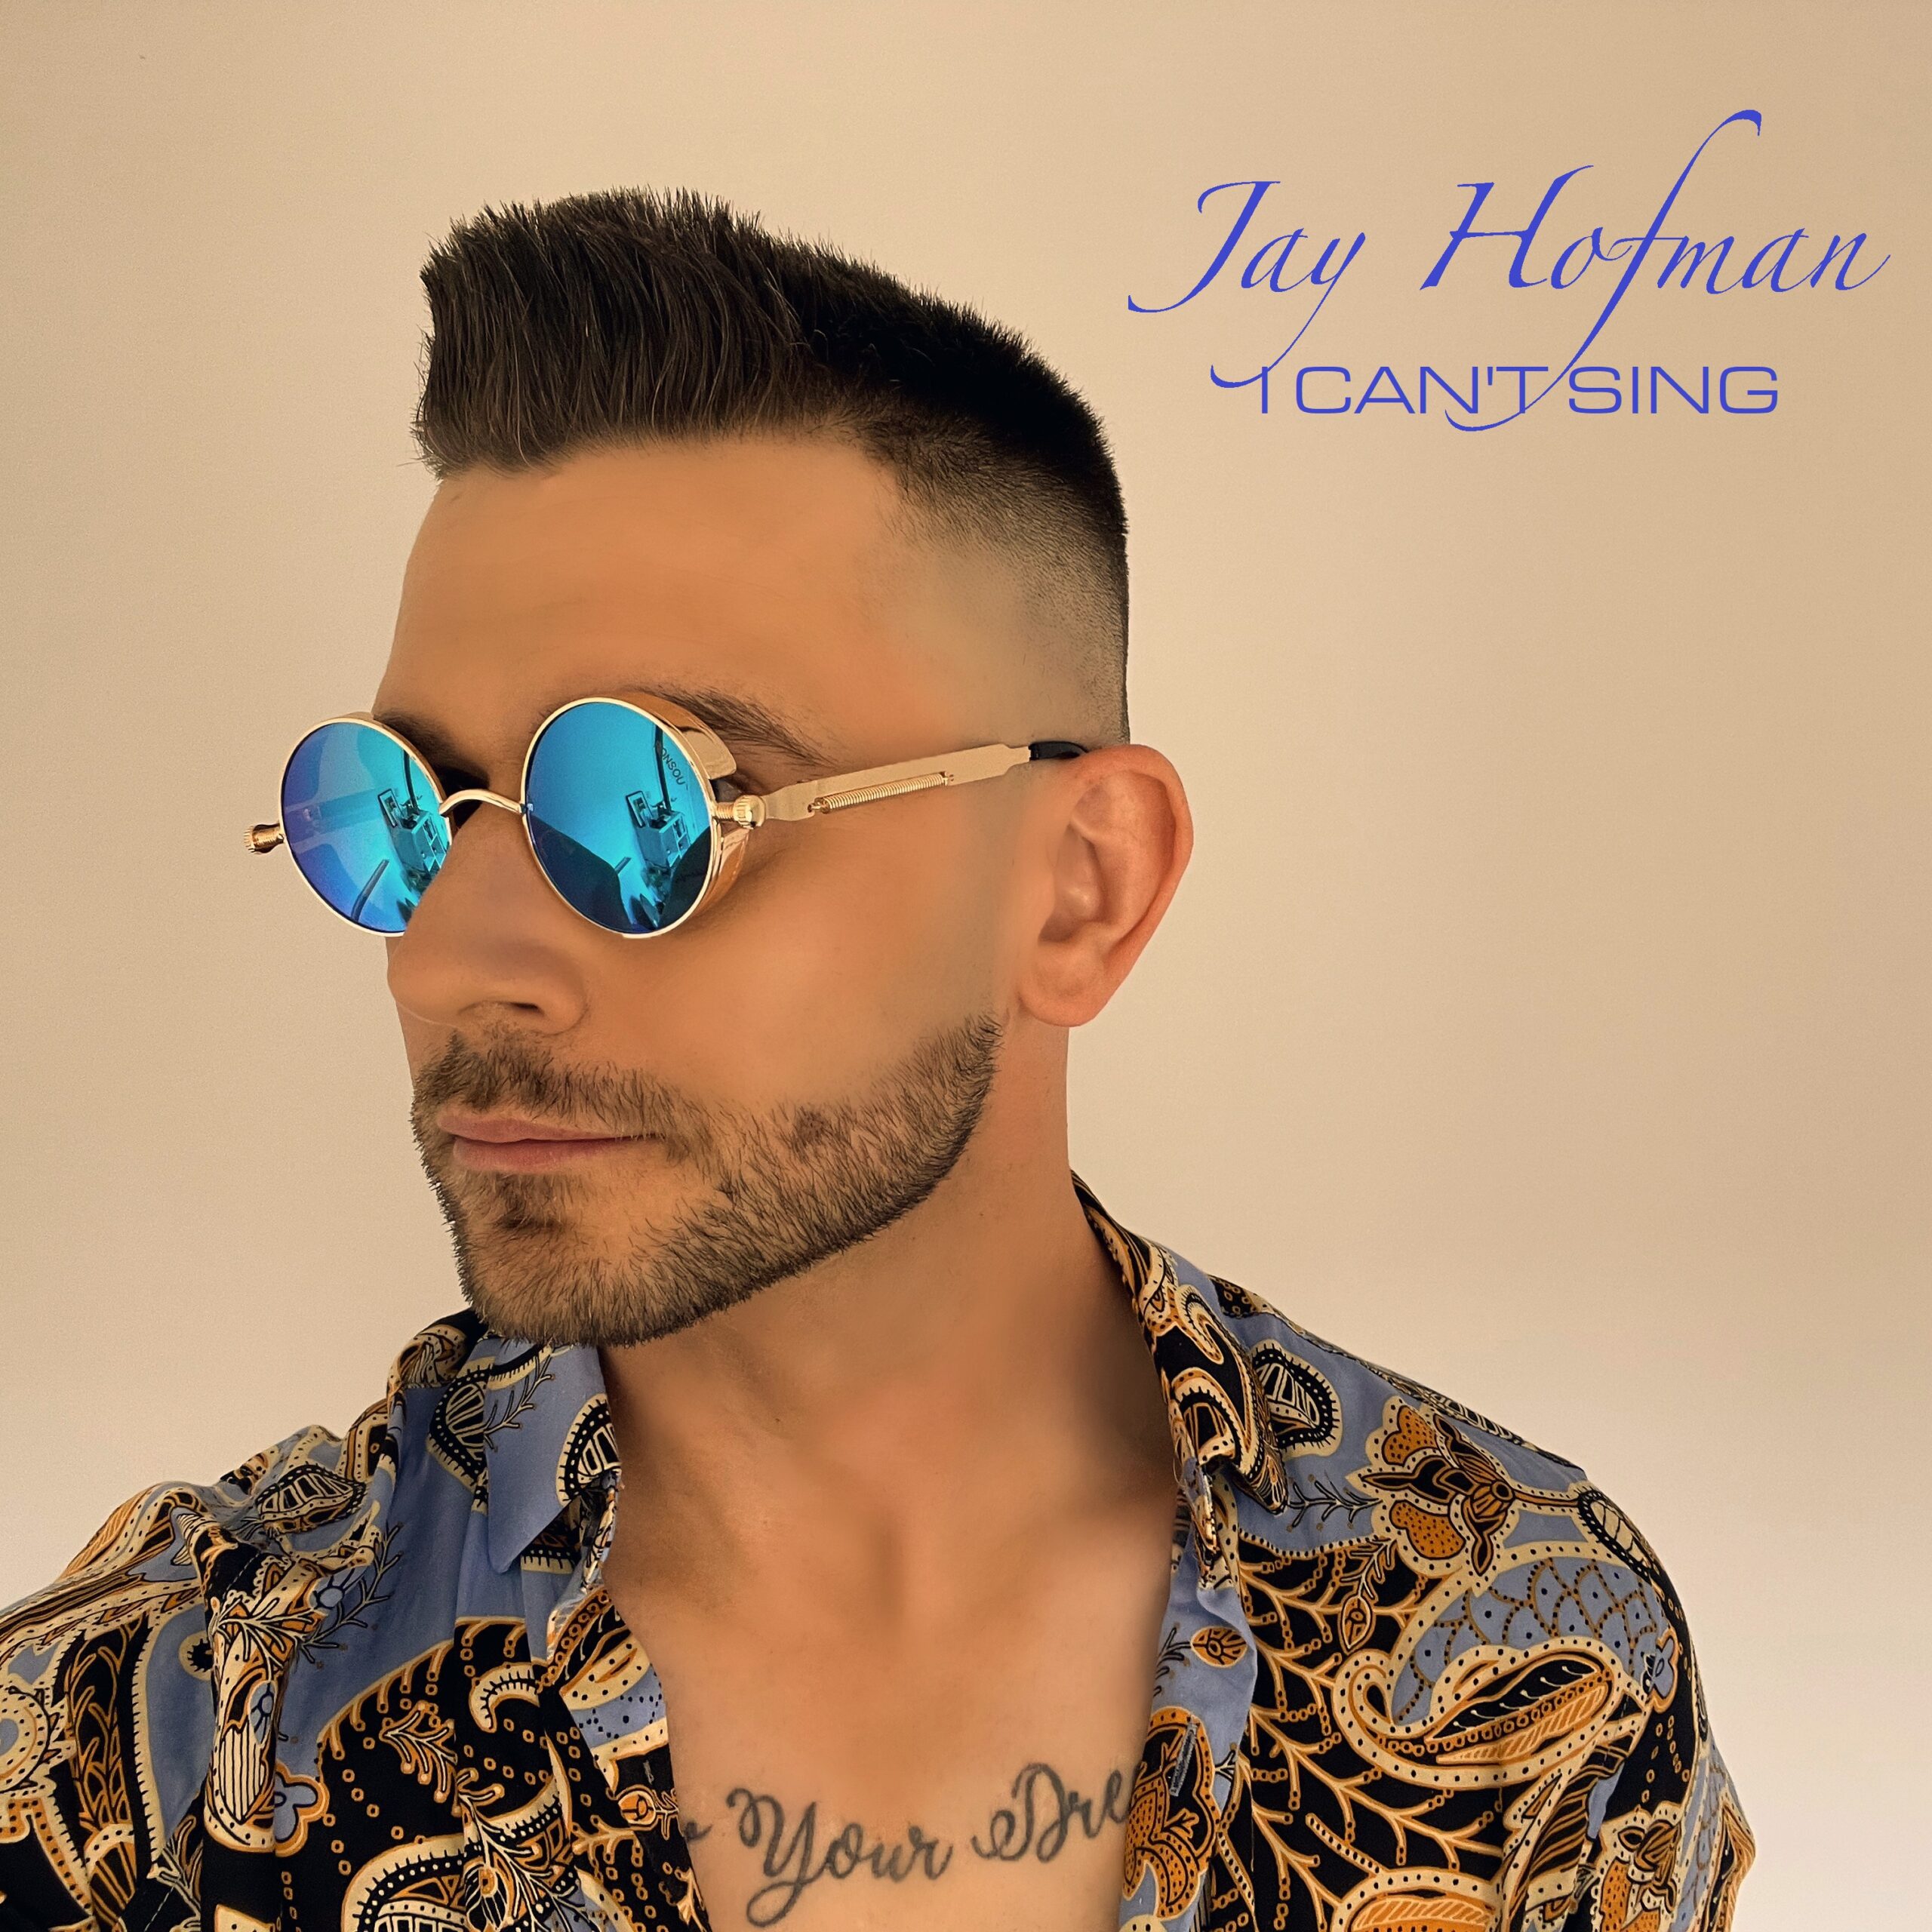 Jay Hofman unveiled an enrapturing self-deprecating indie electro-pop earworm with I Can’t Sing